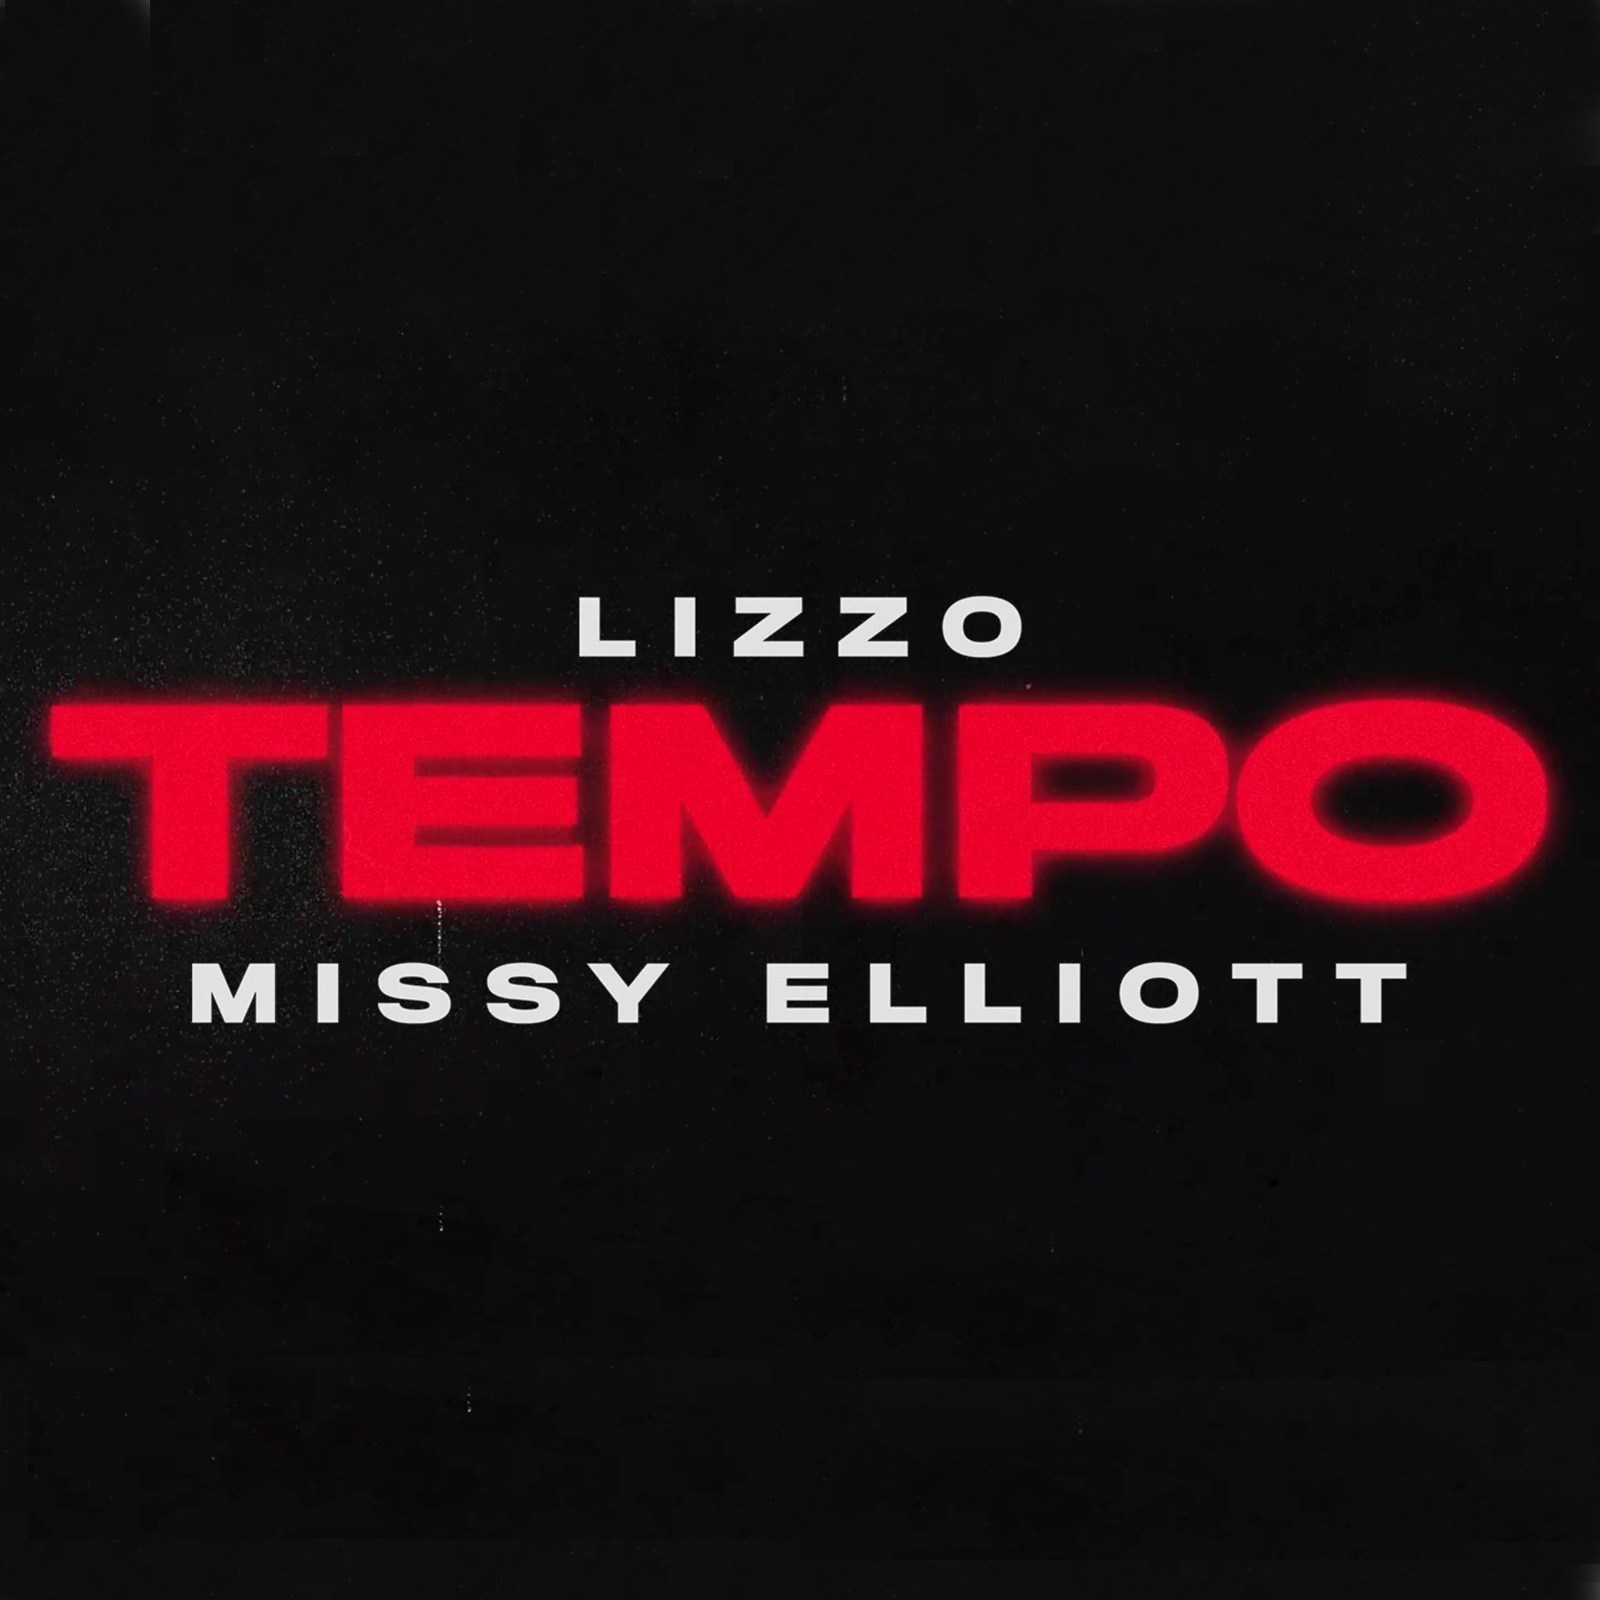 Tempo Lizzo Song Wikipedia - roblox ghostbusters song id